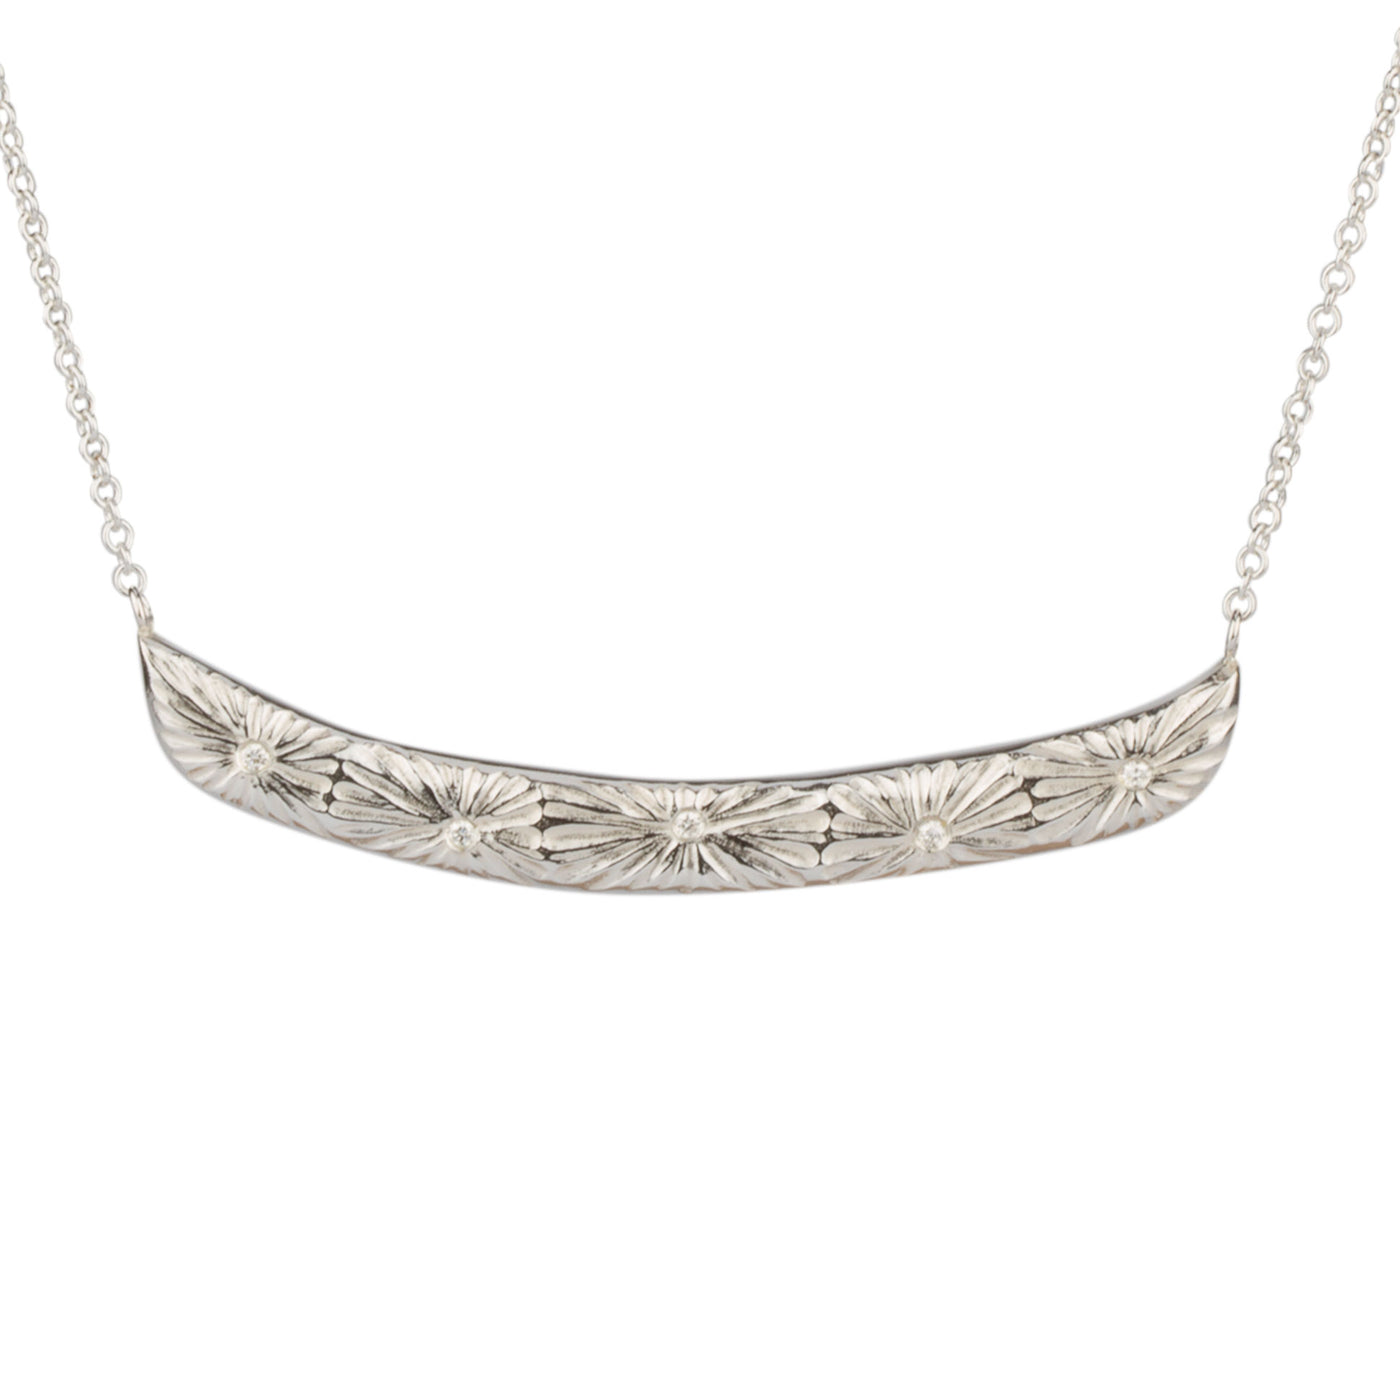 Sterling silver curved bar necklace with five scattered diamonds and an engraved sunburst pattern radiating from each on a white background | Corey Egan